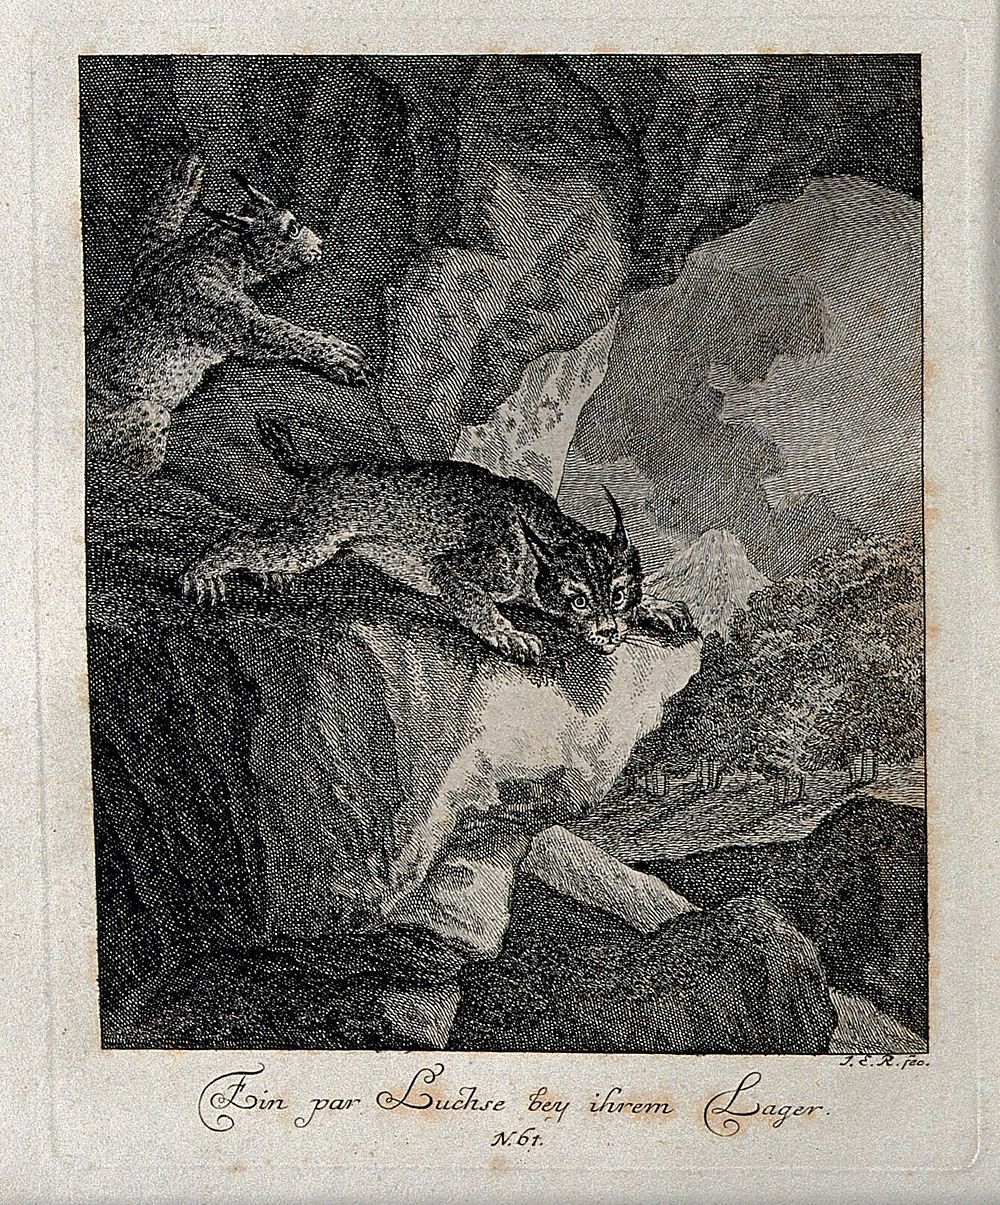 Two lynx in a cave. Etching by J. E. Ridinger.